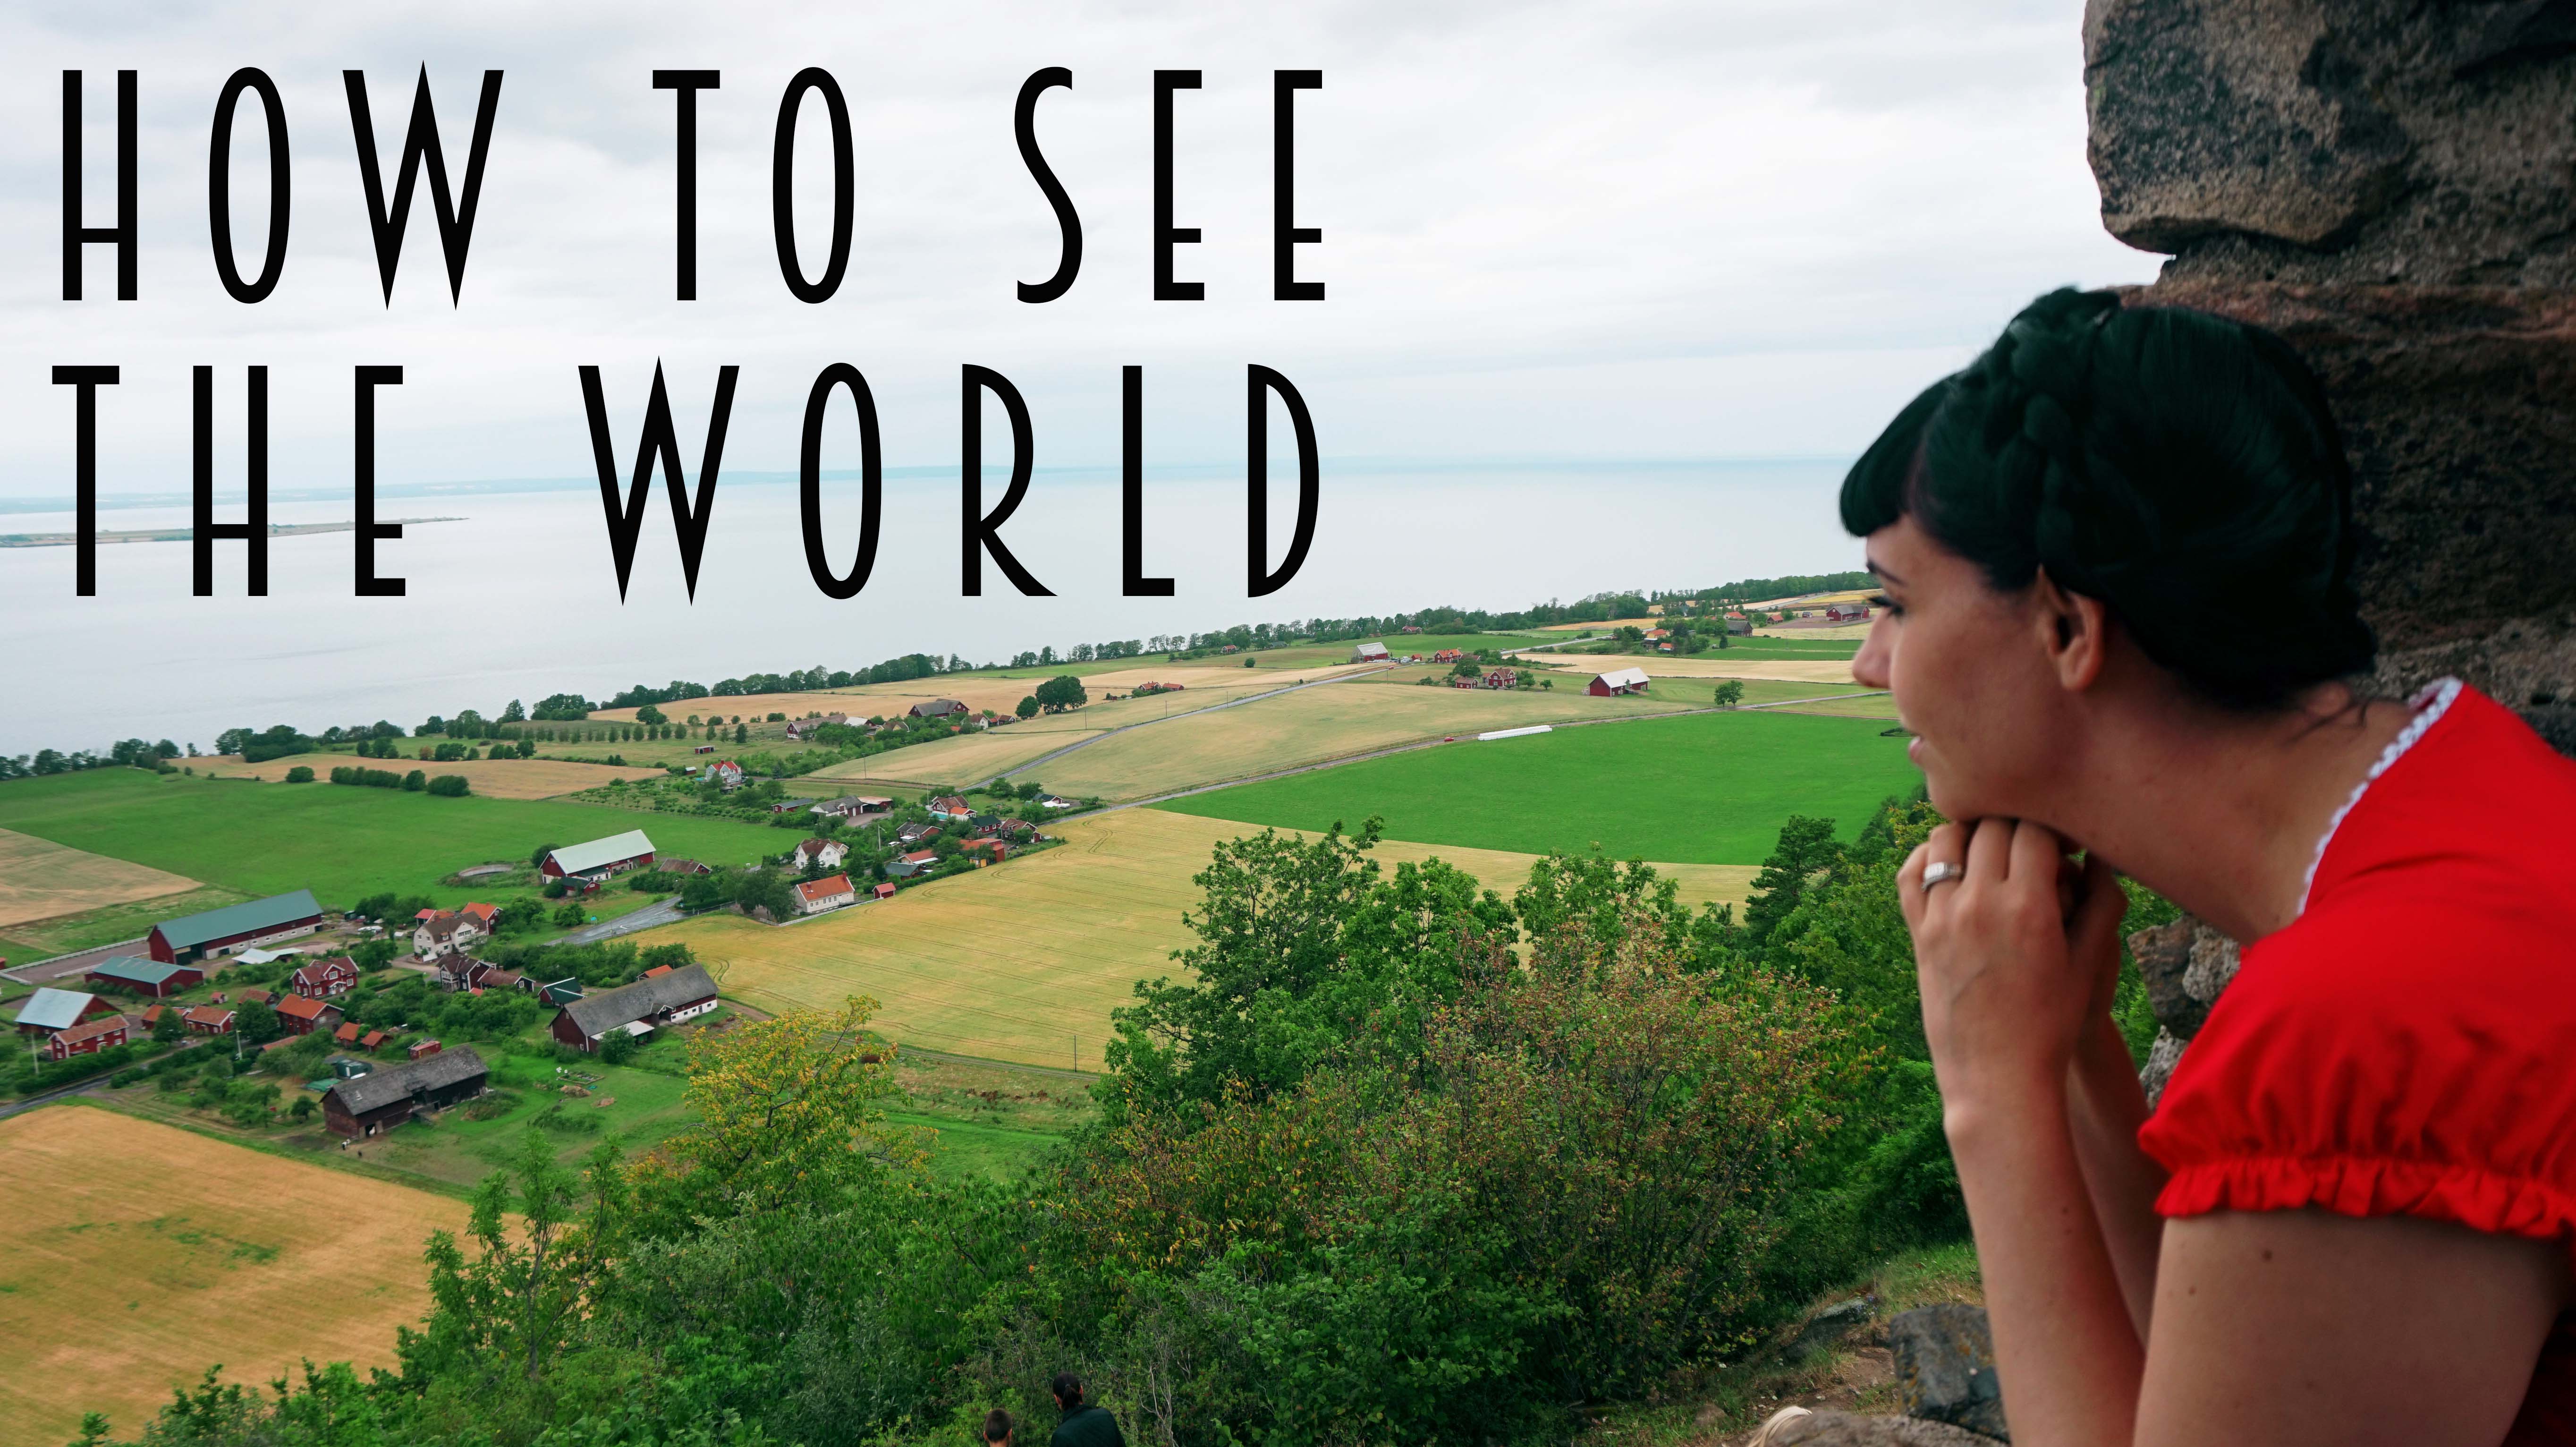 How to see the world